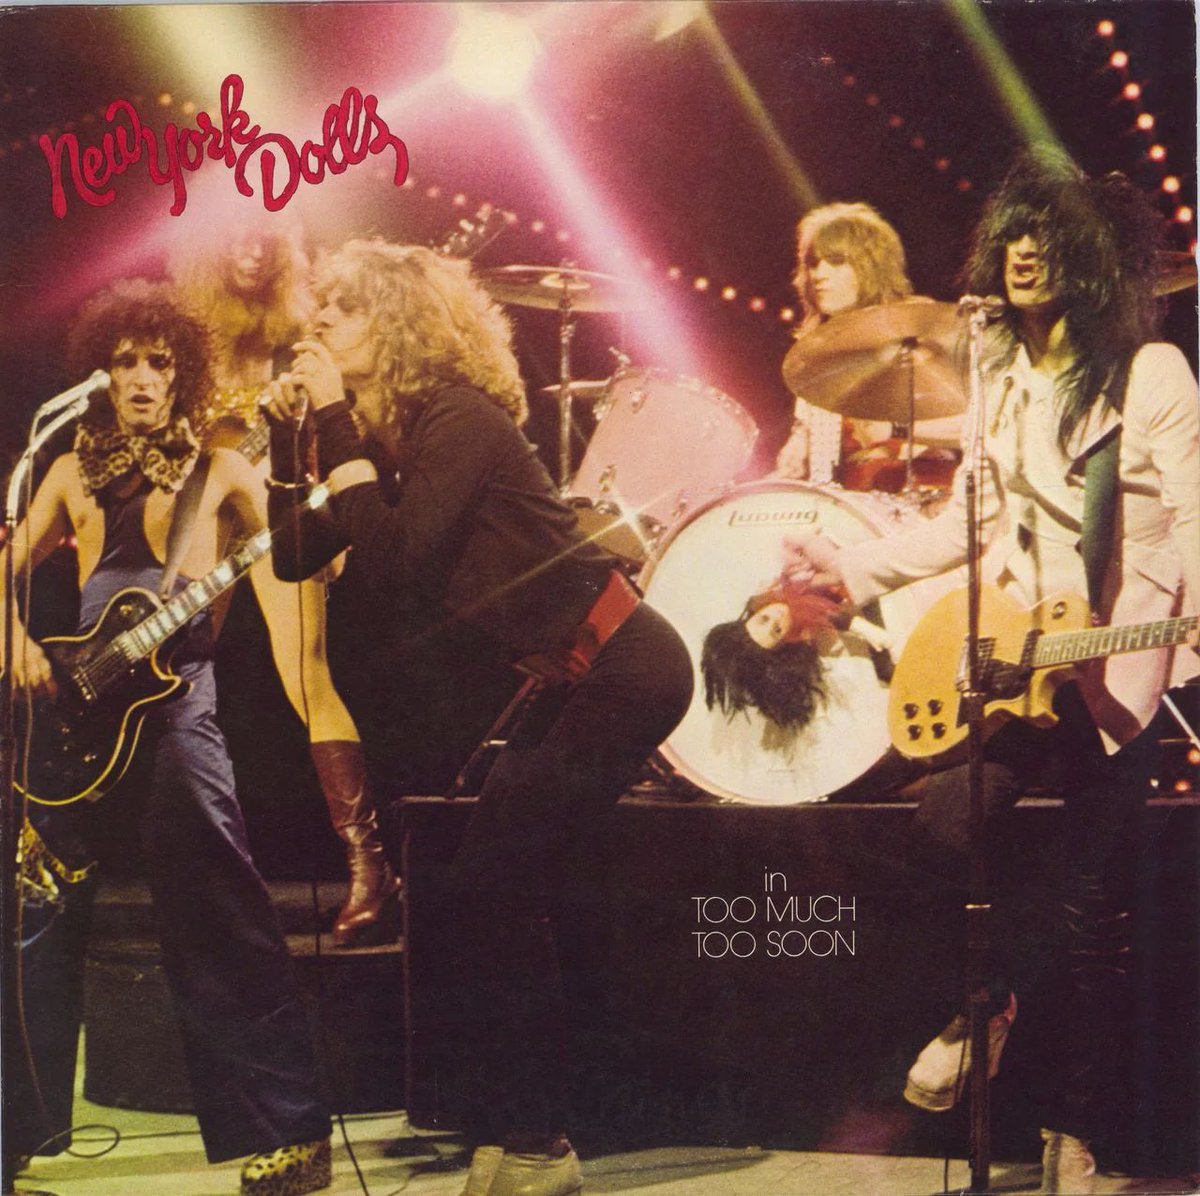 #NewYorkDolls ‘[There's Gonna Be A] Showdown’ from their 2nd album ‘Too Much Too Soon’ released today in 1974 youtu.be/fMAtdDtXQfs?si… via @YouTube